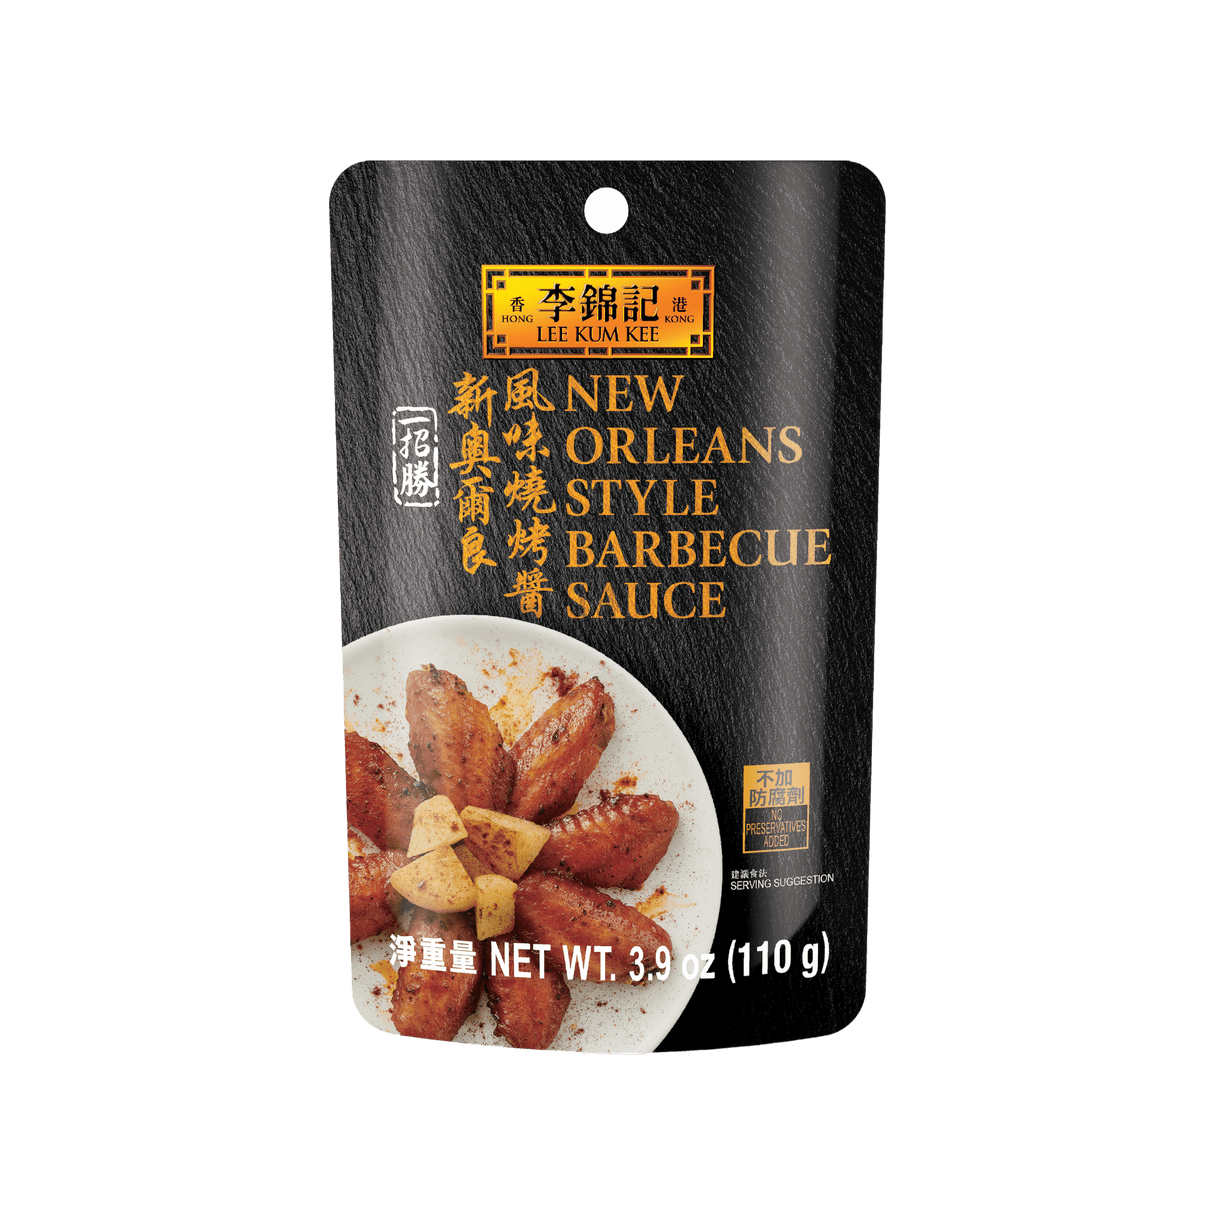 Lee Kum Kee New Orleans Style Barbecue Sauce